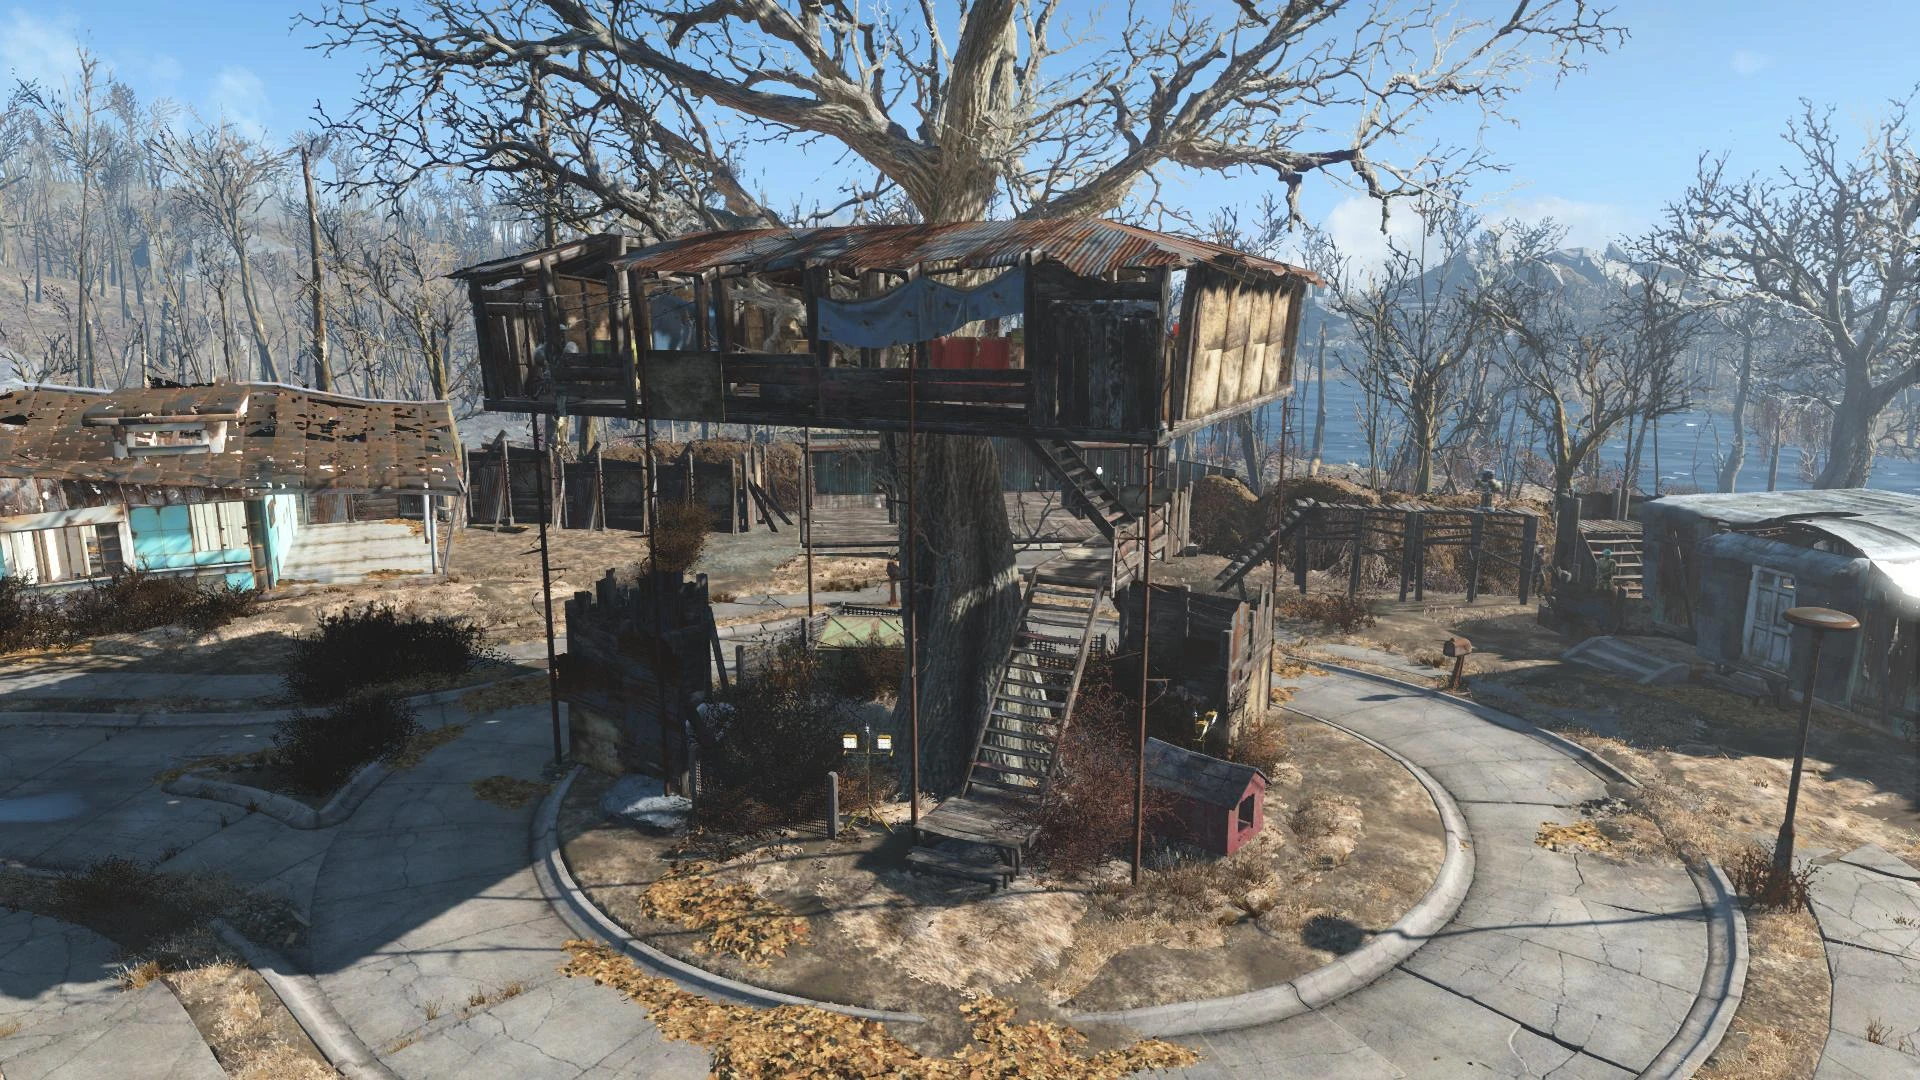 Building a tree house fallout 4